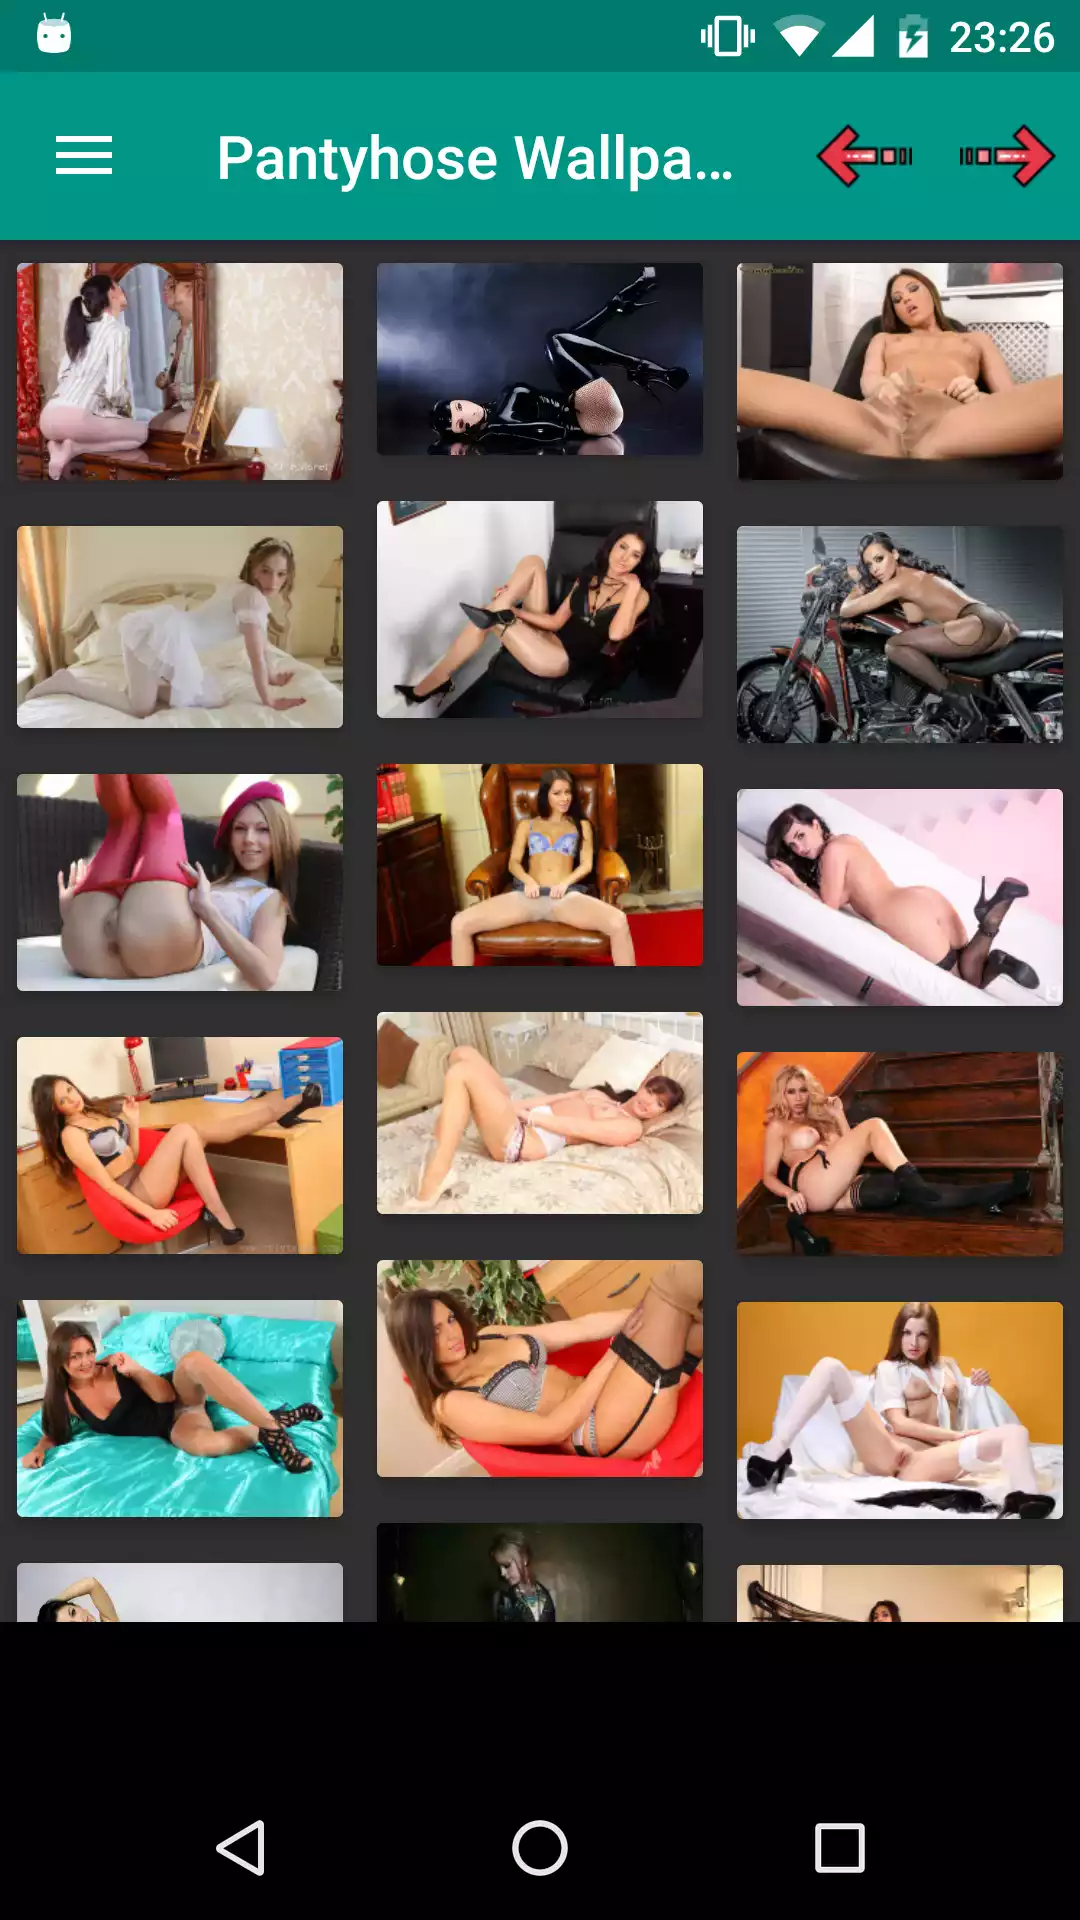 Pantyhouse backgrounds editor,gallery,apps,photo,shemale,puzzles,comixharem,android,panties,wallpapers,anime,amateur,nylon,fetish,saxy,best,pantyhouse,hentai,porn,photos,futanari,image,download,wallpaper,sexy,erotic,oictures,mod,apk,pornstars